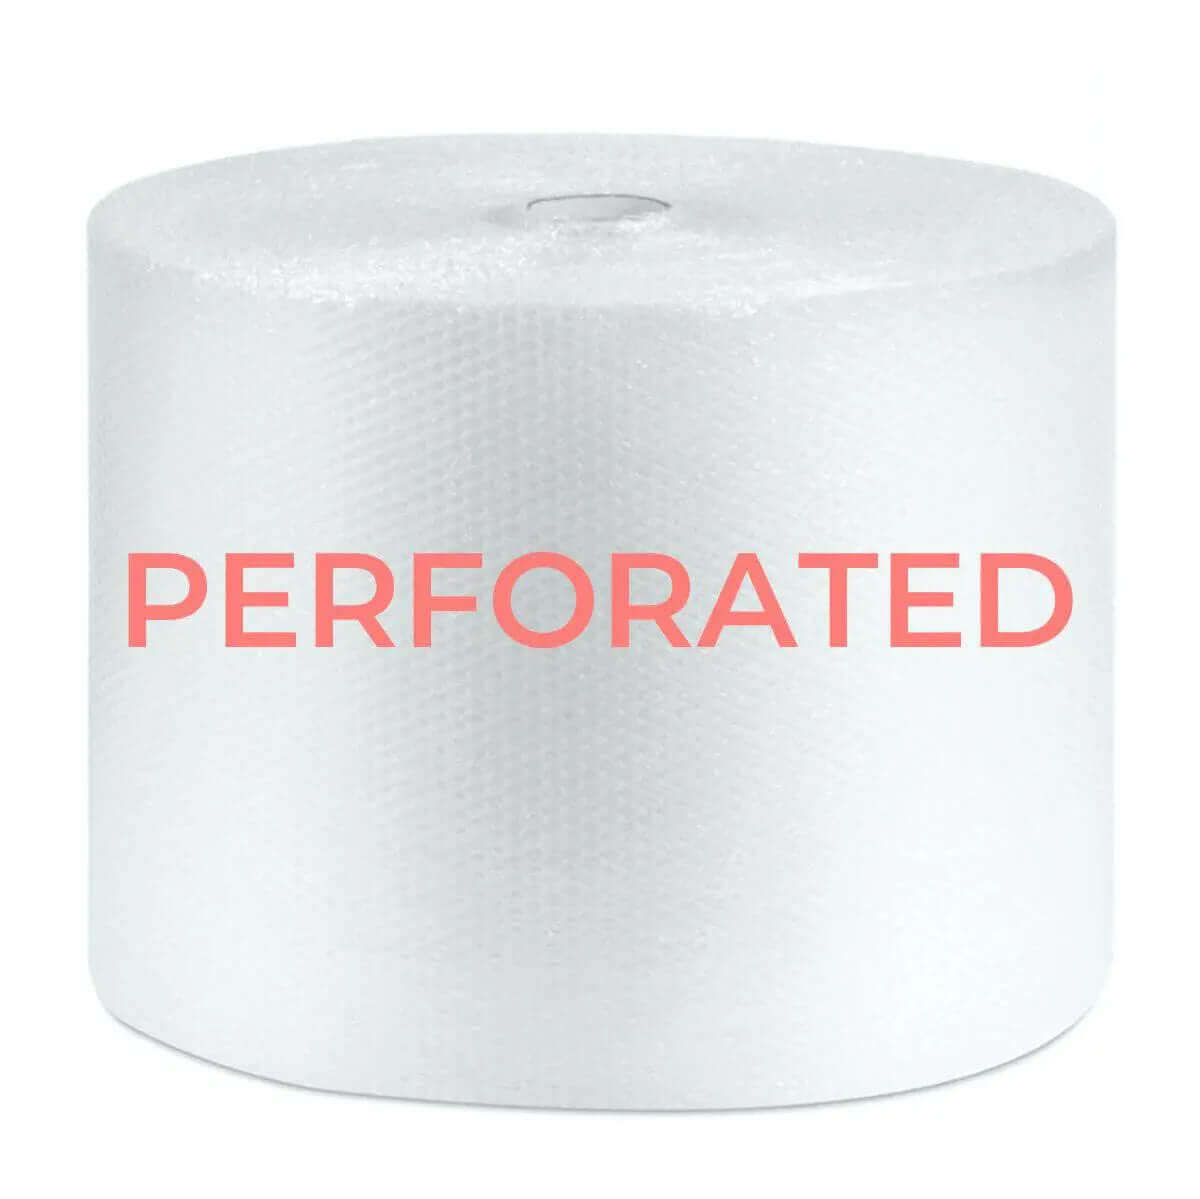 Perforated Bubble Wrap Roll - 500mm x 100m | Bubble Wrap | Packstore